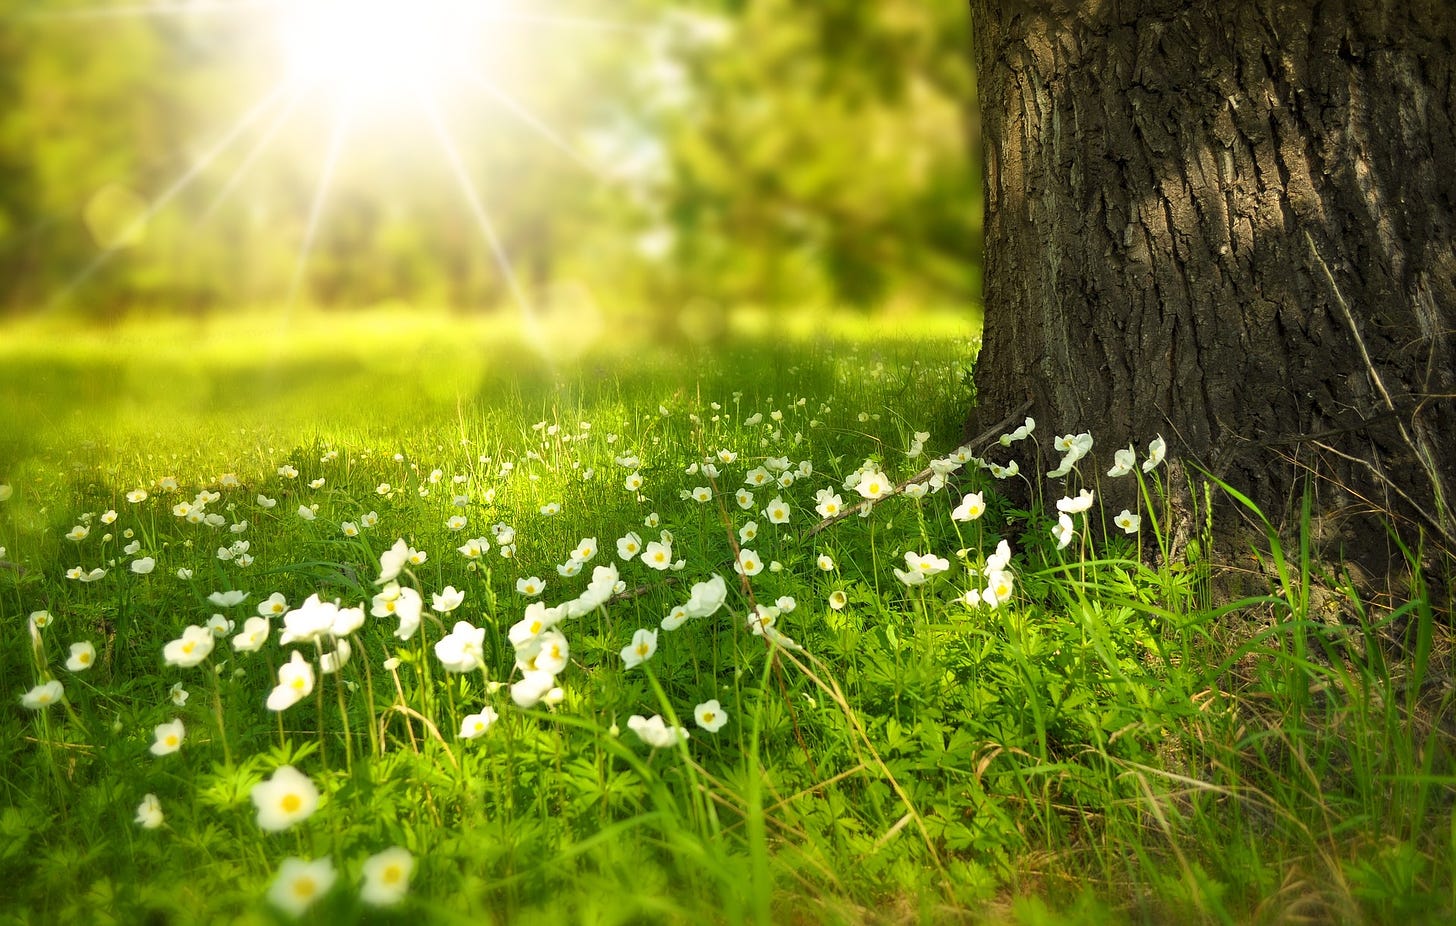 A patch of yellow-centered white flowers surrounds a tree trunk as the sun shines through the trees in the distance.